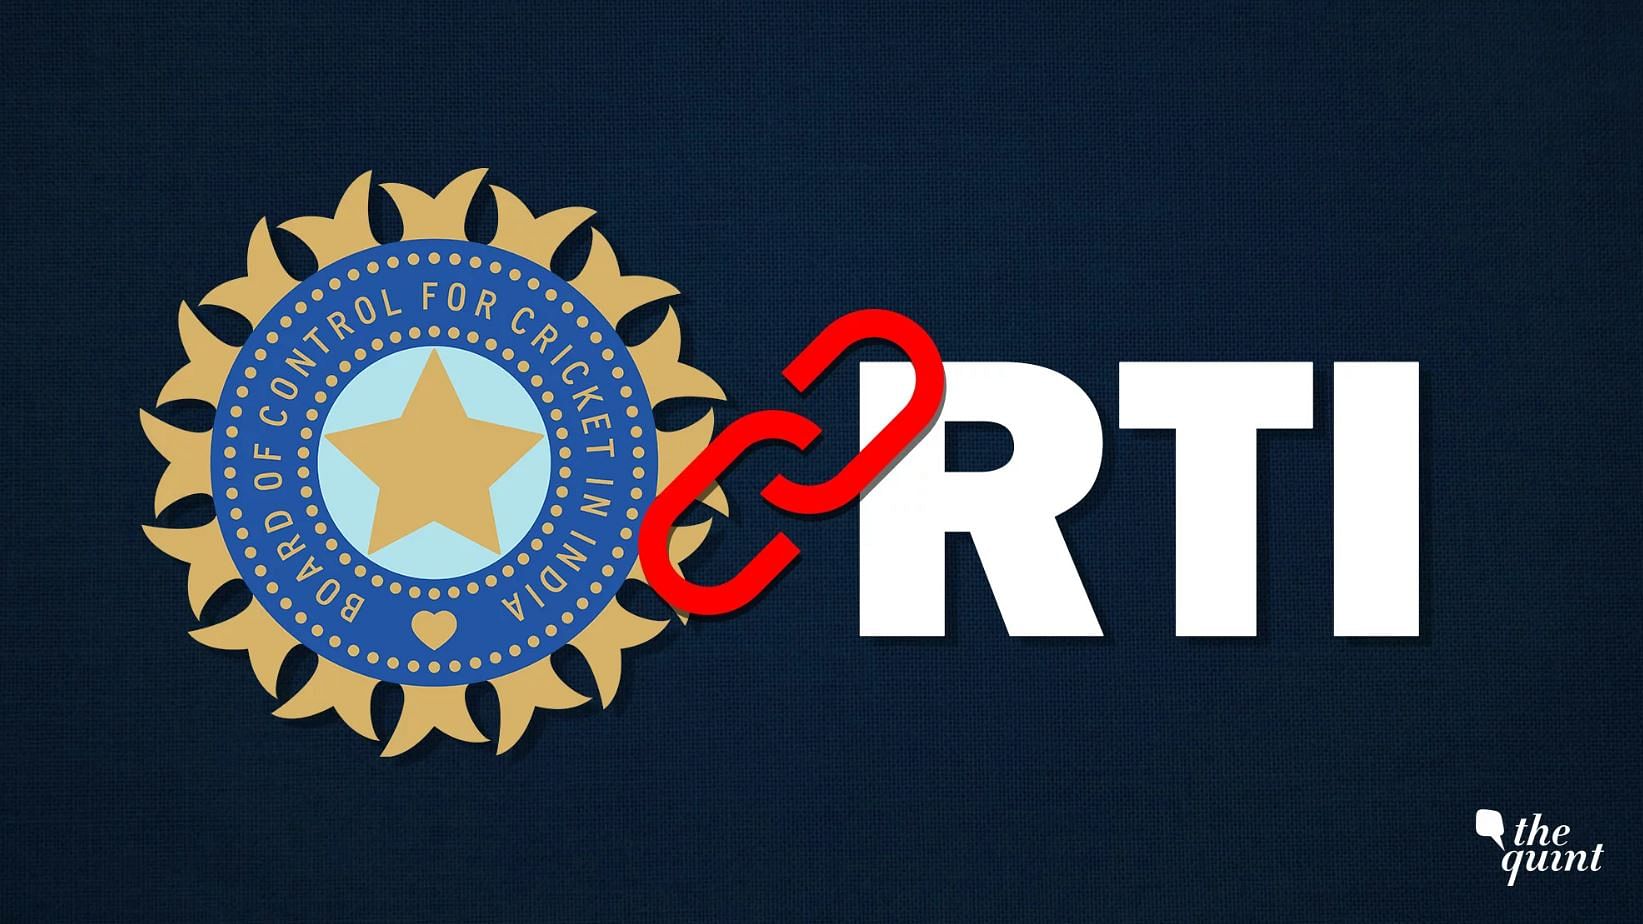 The BCCI is likely to challenge the Central Information Commission’s ruling that the cricket board be brought under the RTI act.